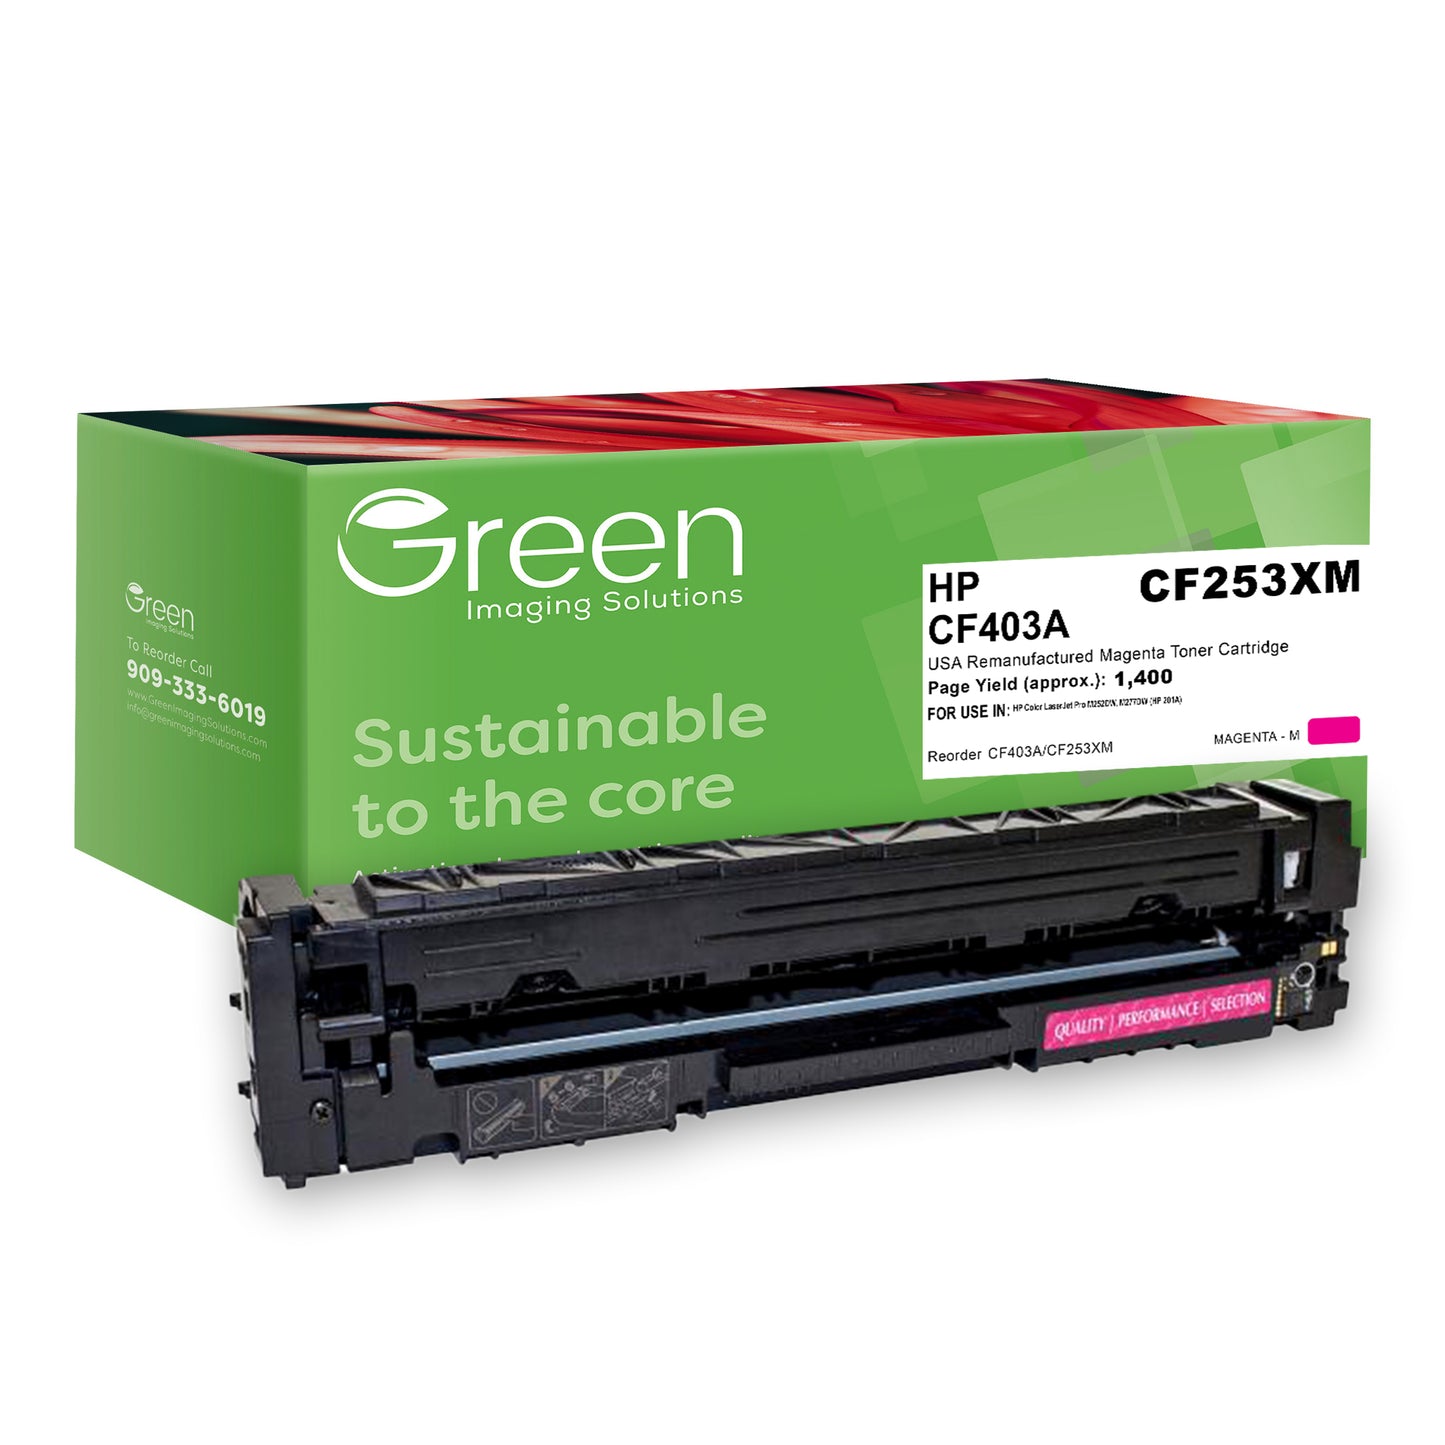 GIS USA Remanufactured Magenta Toner Cartridge for HP CF403A (HP 201A)